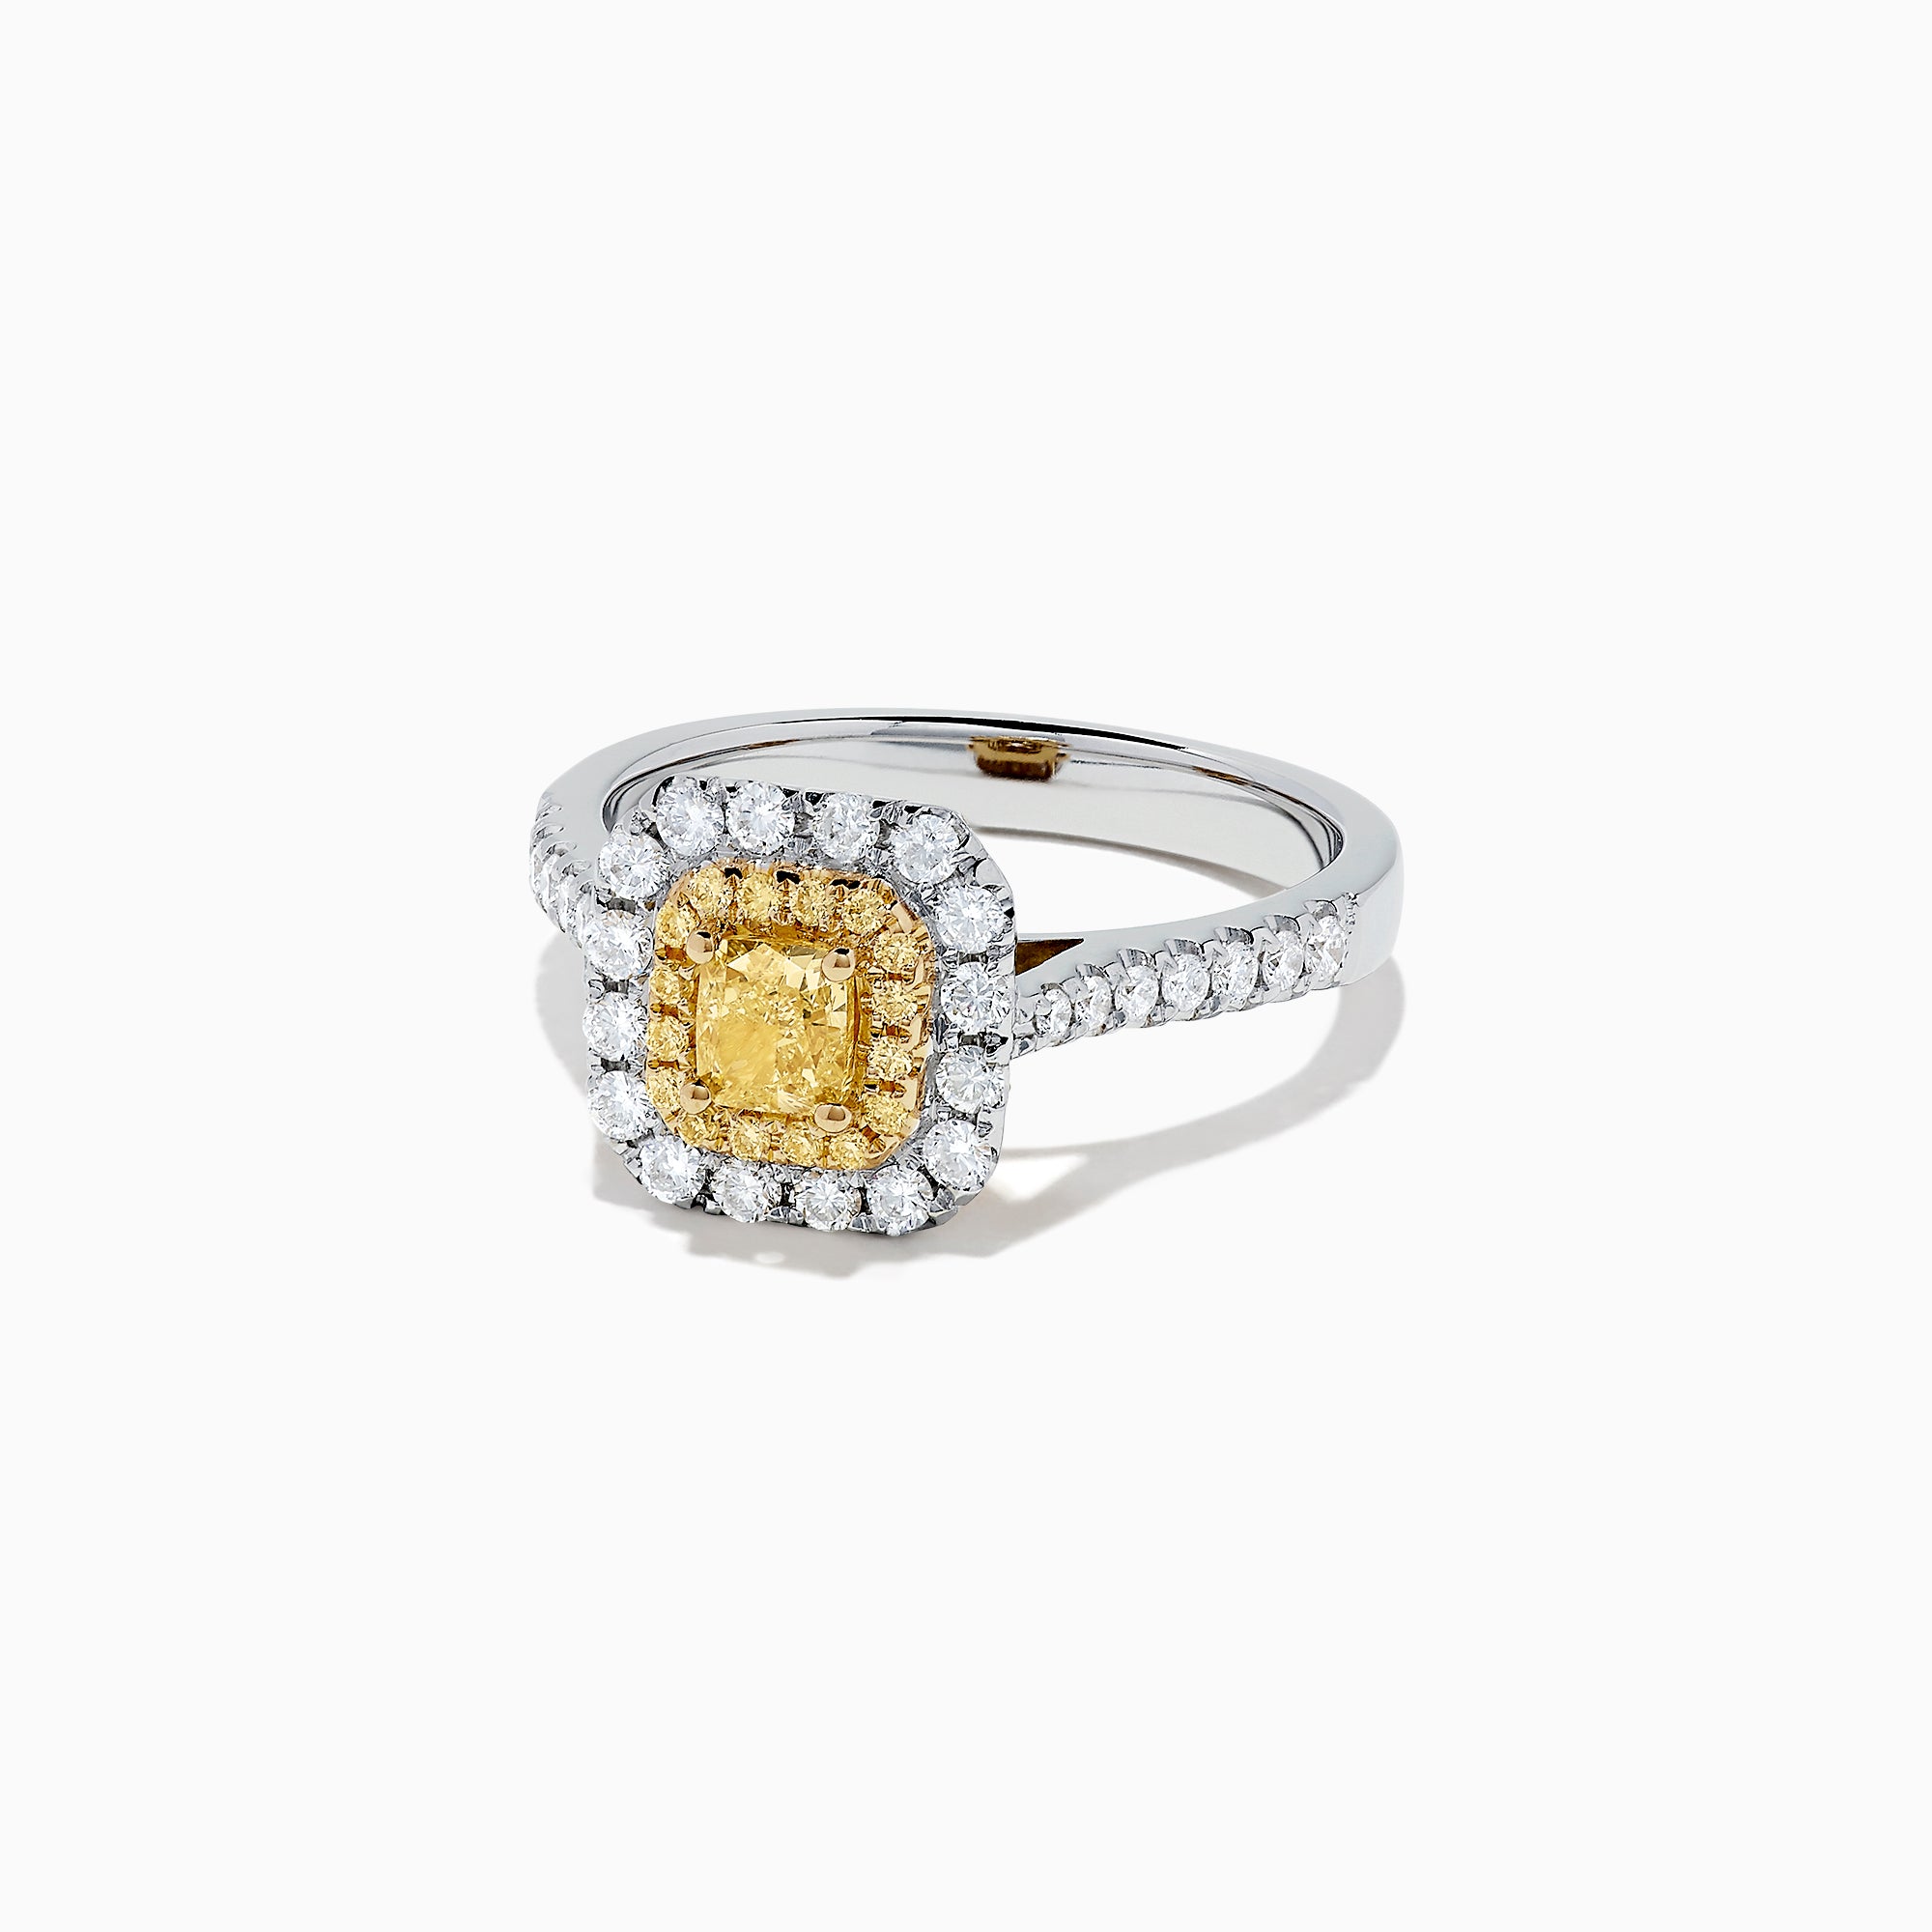 Effy Canare 18K Two Tone Gold Yellow and White Diamond Ring, 0.97 TCW